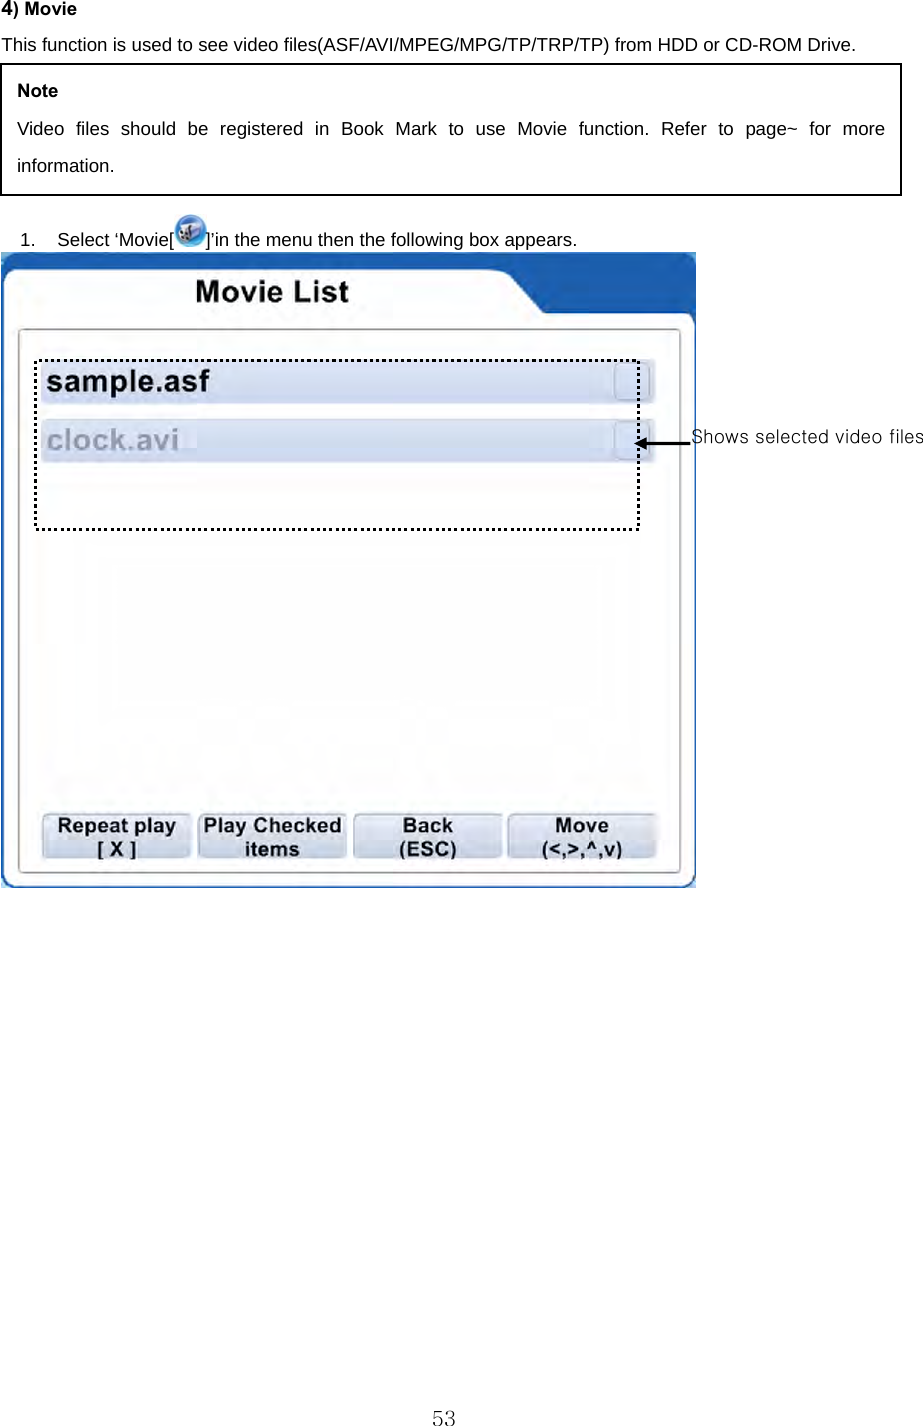 4) Movie This function is used to see video files(ASF/AVI/MPEG/MPG/TP/TRP/TP) from HDD or CD-ROM Drive.   .  동영상 파일을 재생하려면  Note Video files should be registered in Book Mark to use Movie function. Refer to page~ for more information. 1. Select ‘Movie[ ]’in the menu then the following box appears.  Shows selected video files   53